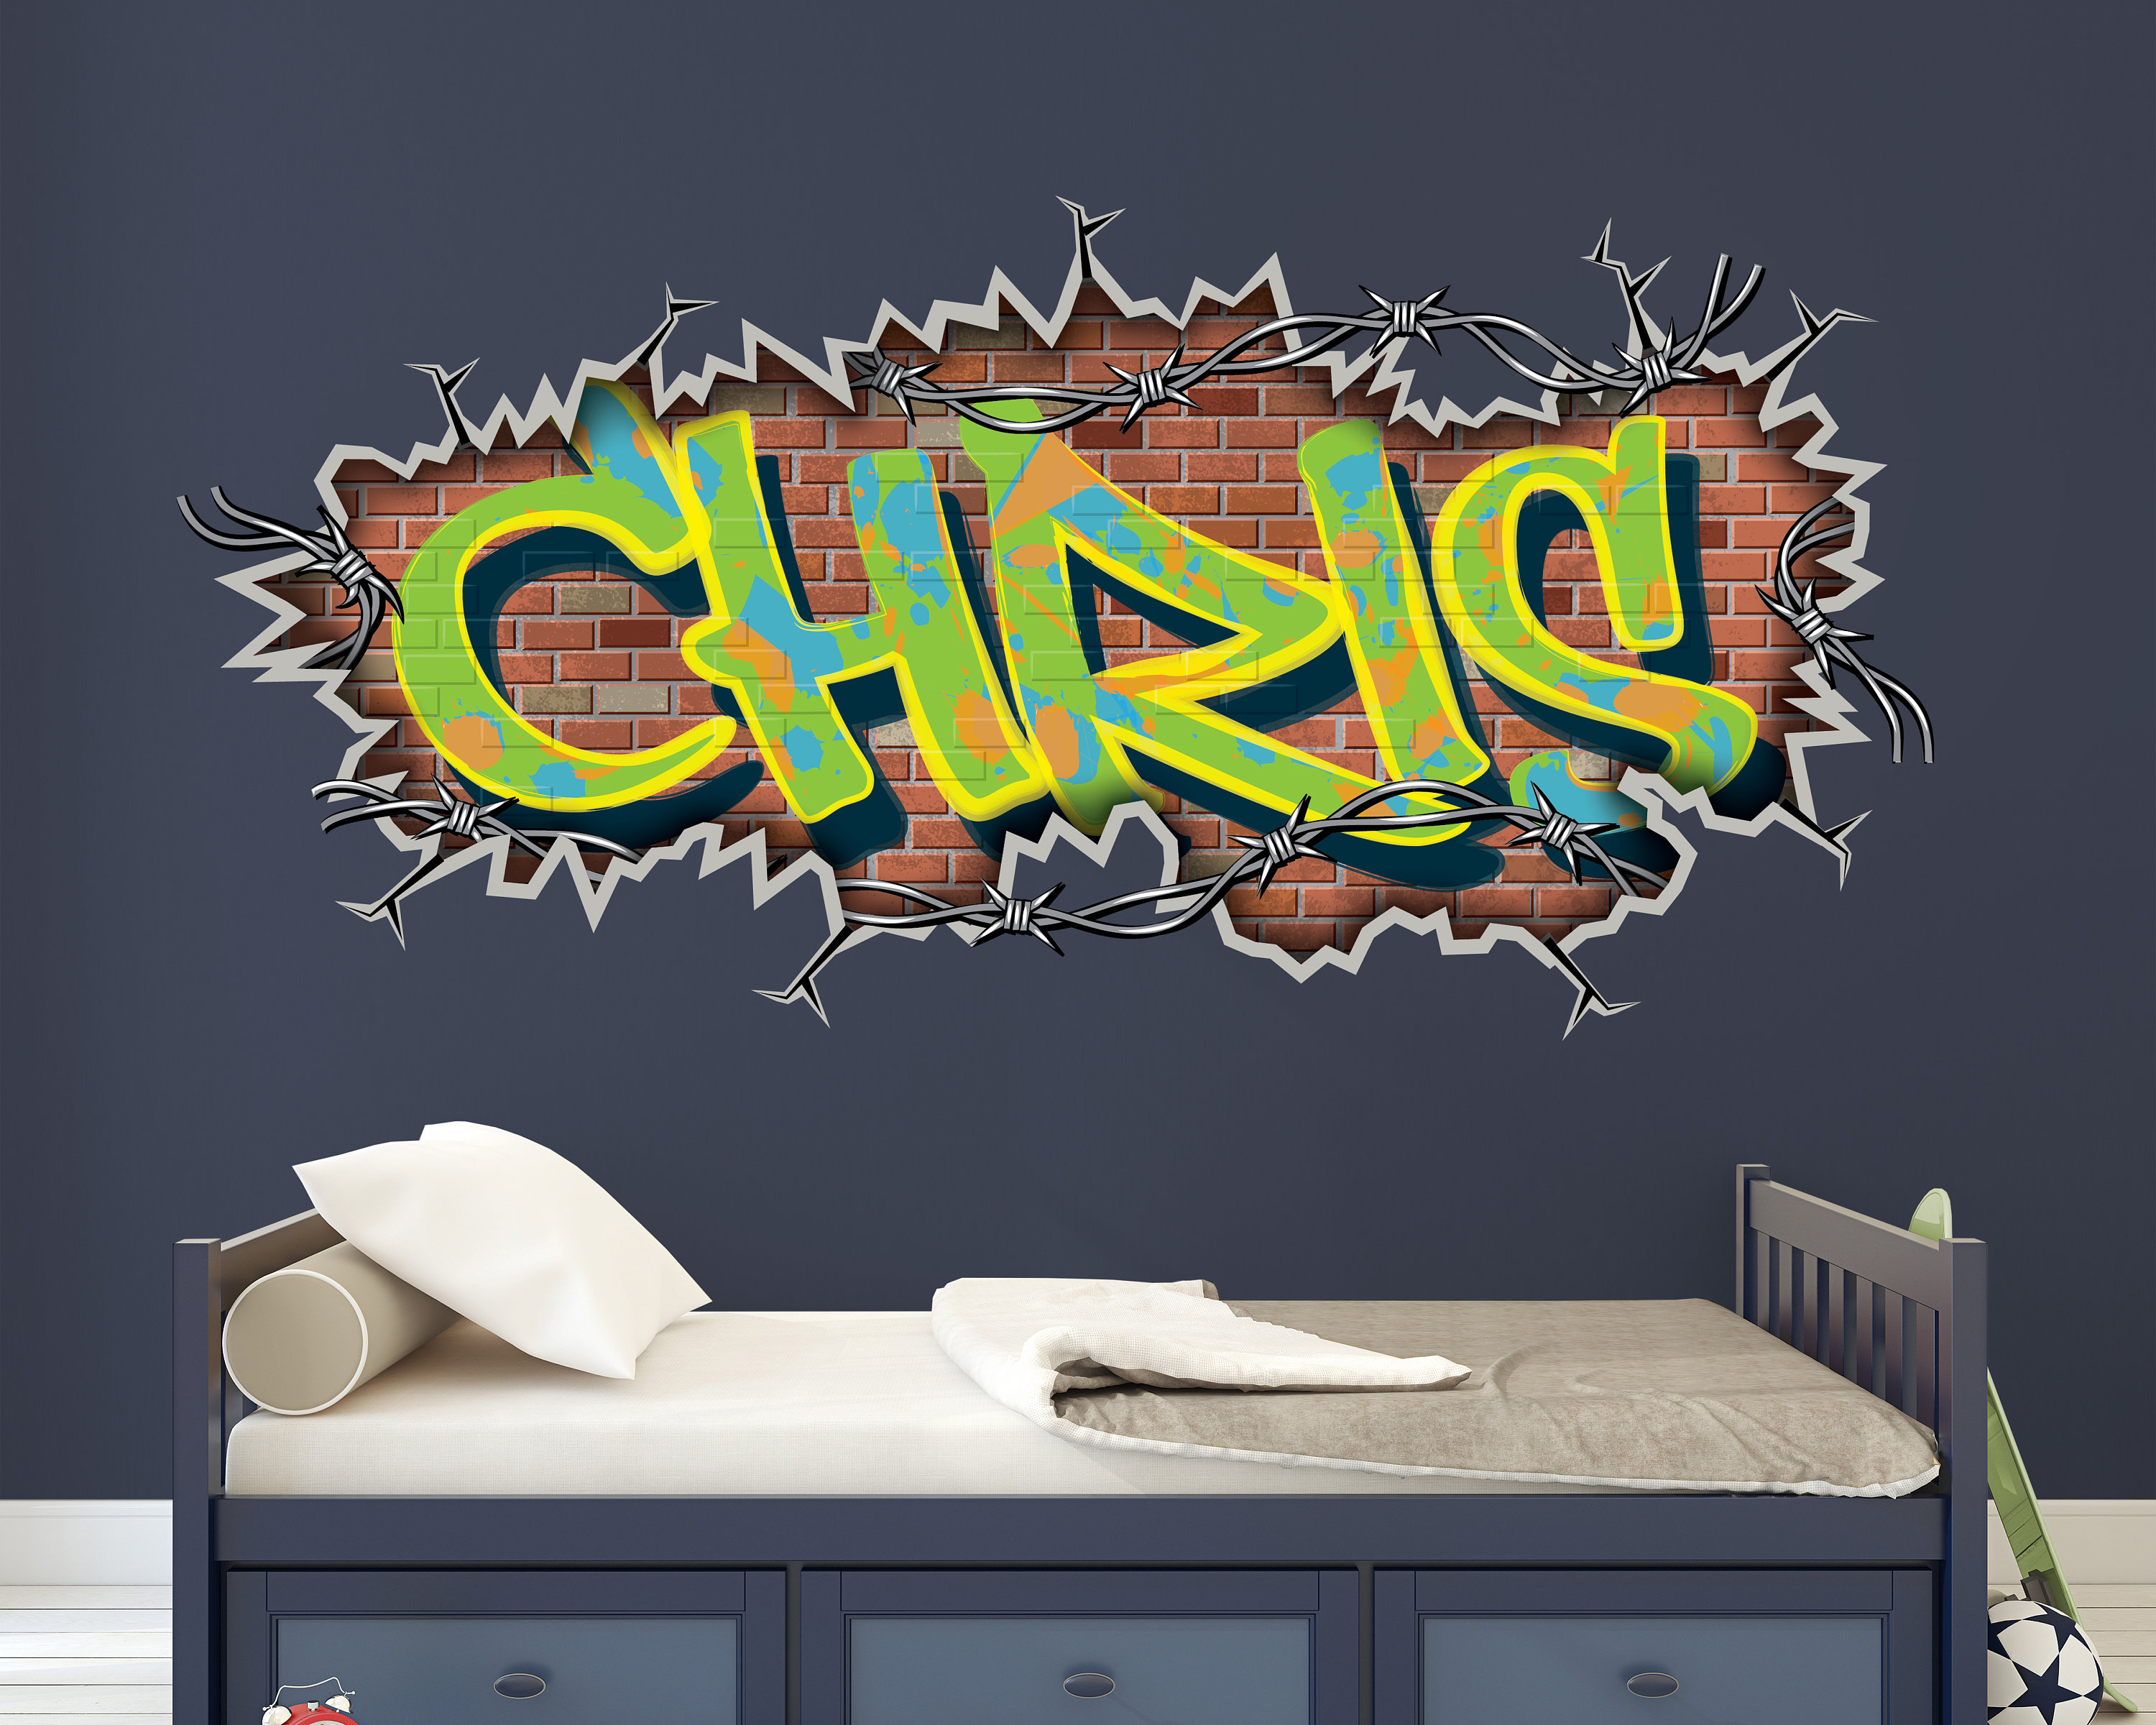 Cool Graffiti Wall Art Name Removable Custom Brick Wall Decal Spray Paint  Large Sticker Decal Boys Room Decor Trend Personalized Teen Room -   Israel